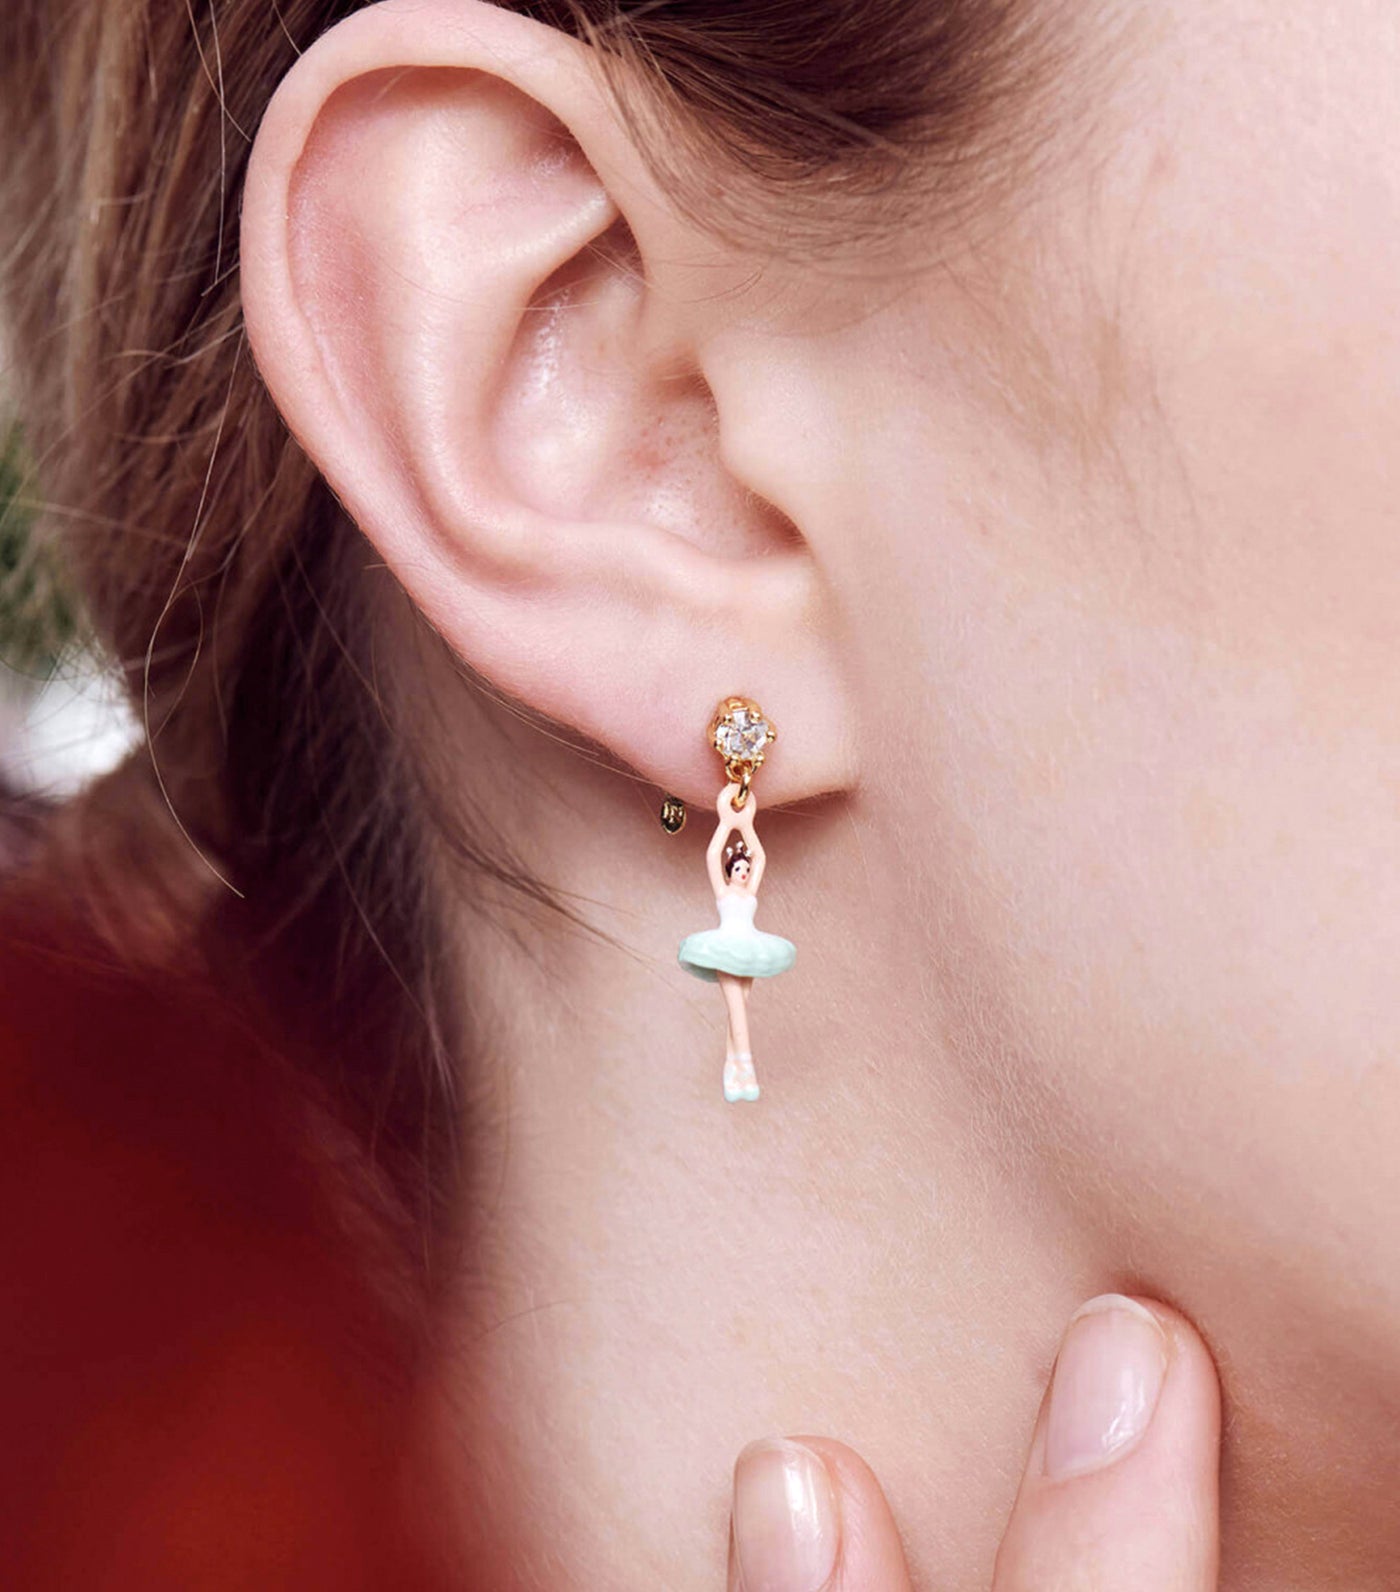 Ballerina And Faceted Crystal Earrings